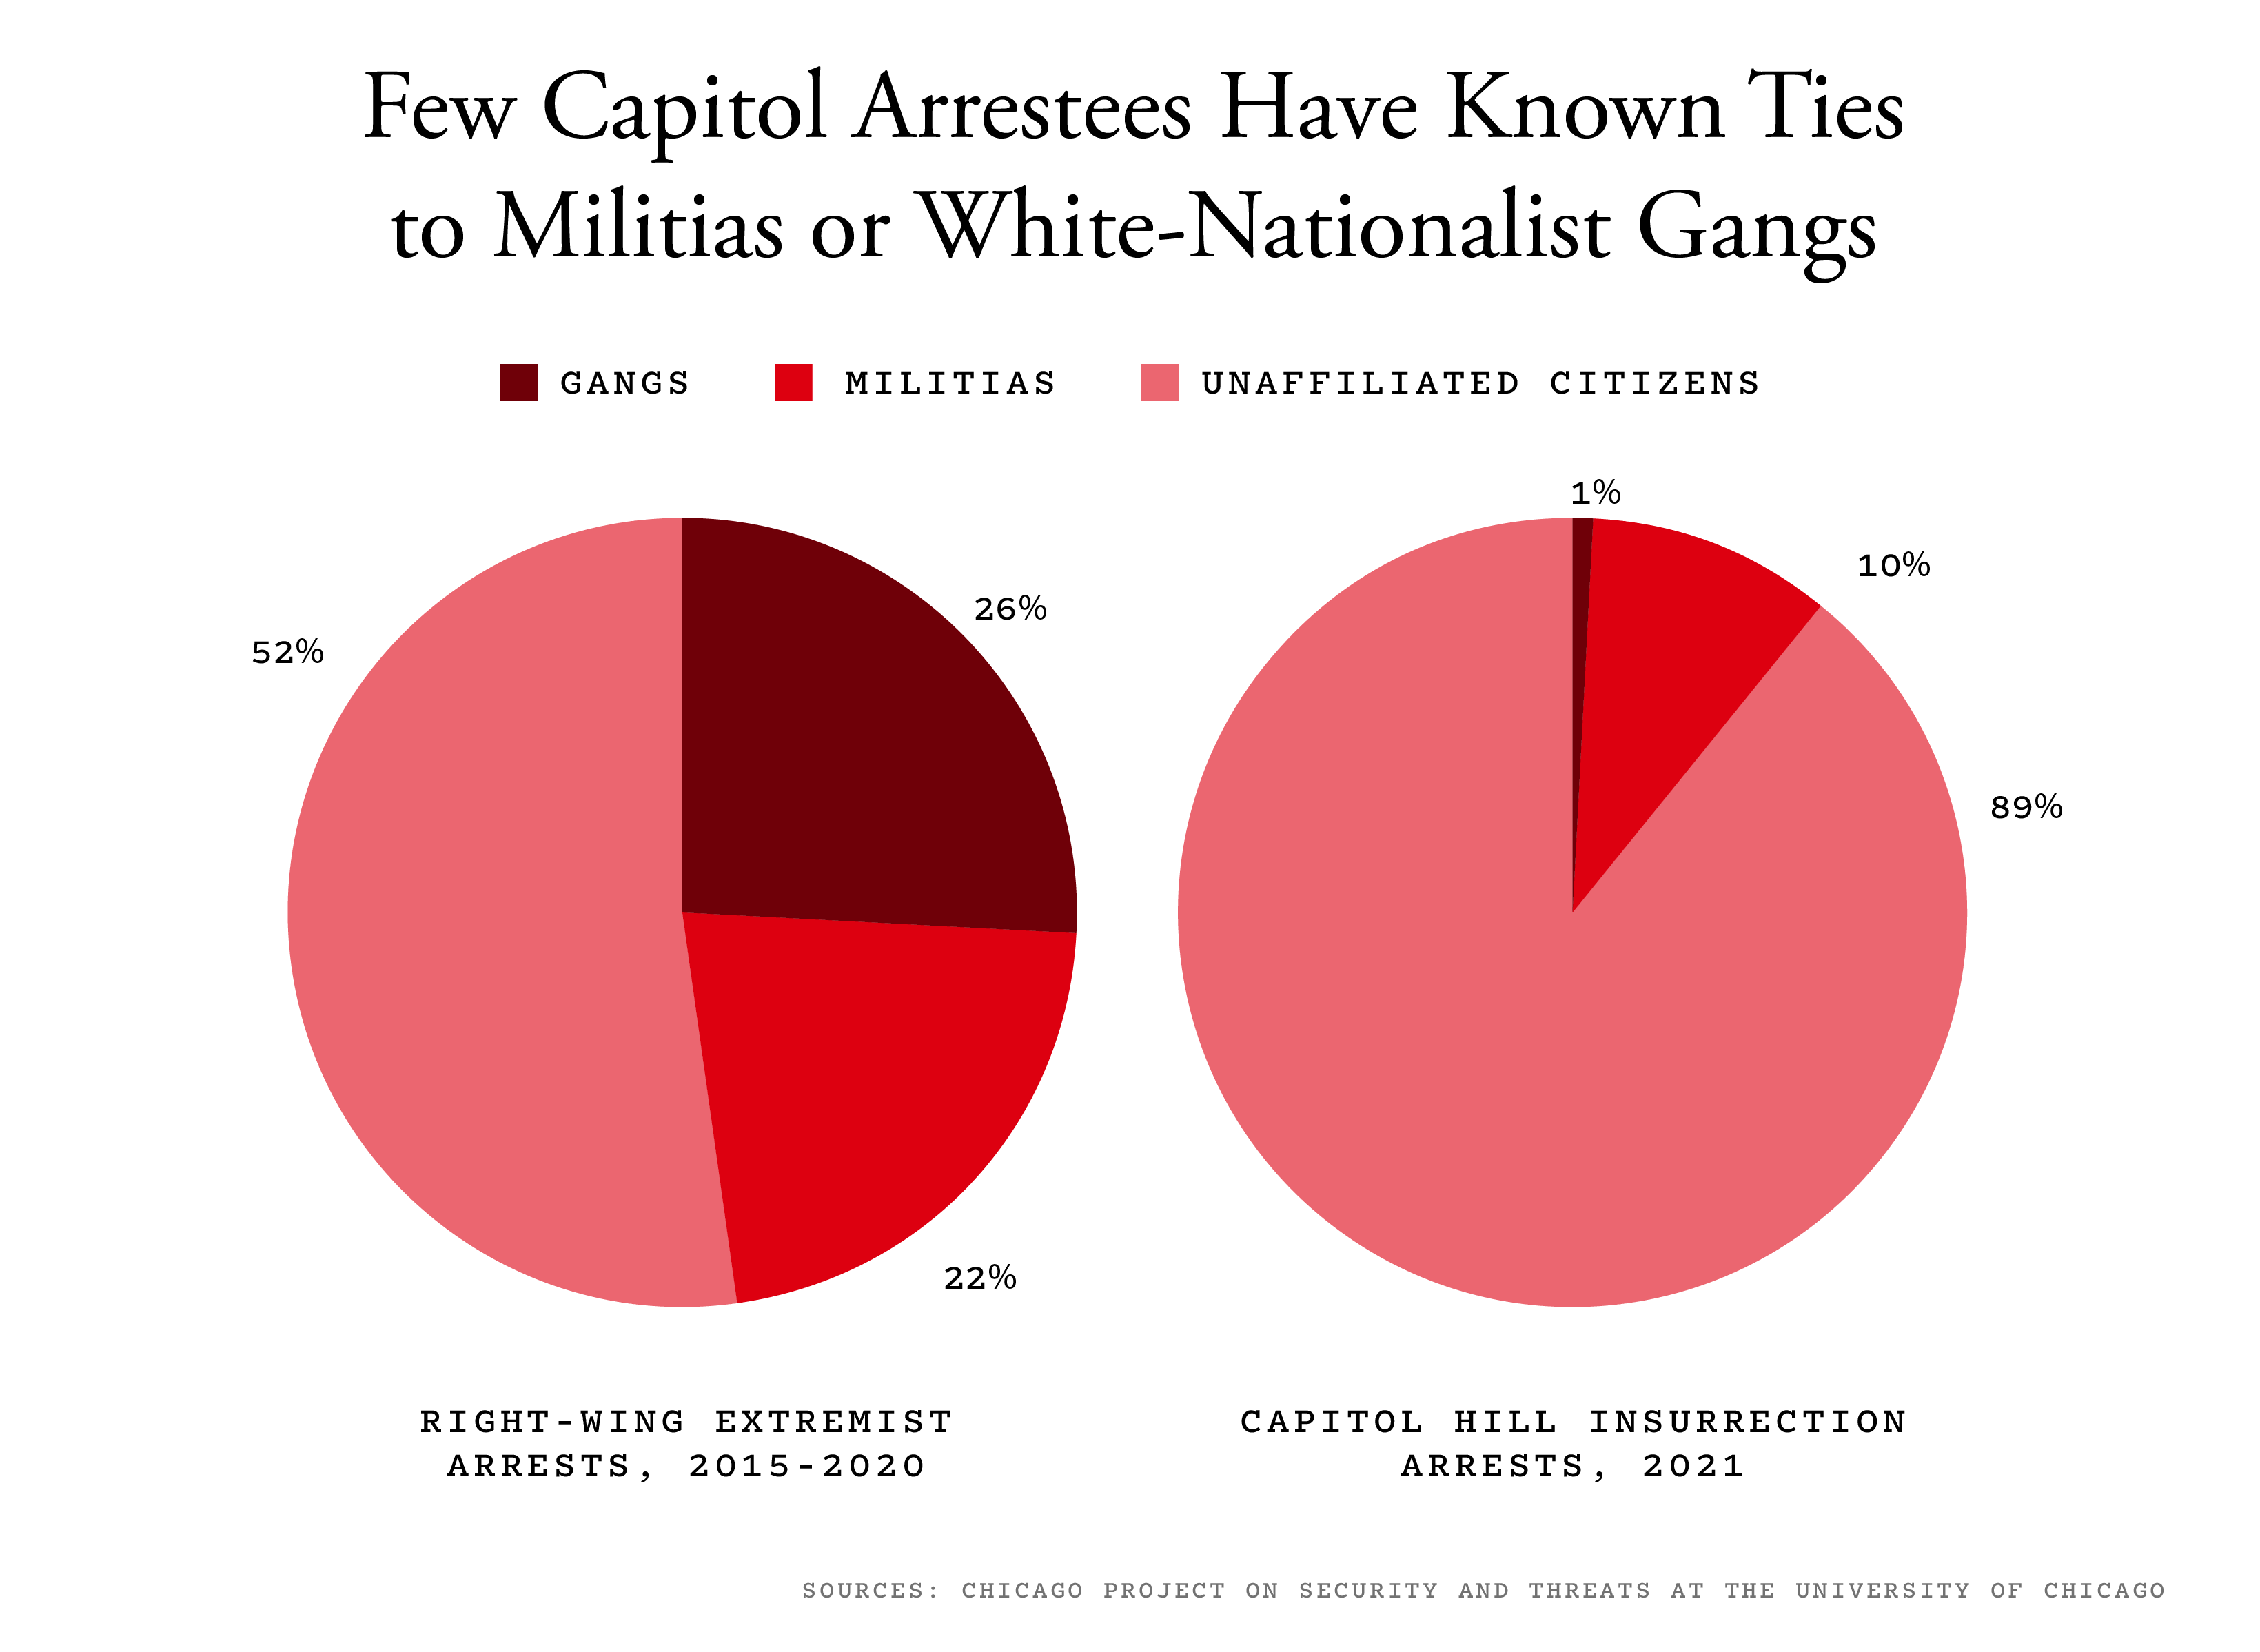 A chart of Capitol arrestees who have ties to militias or white-nationalist gangs.